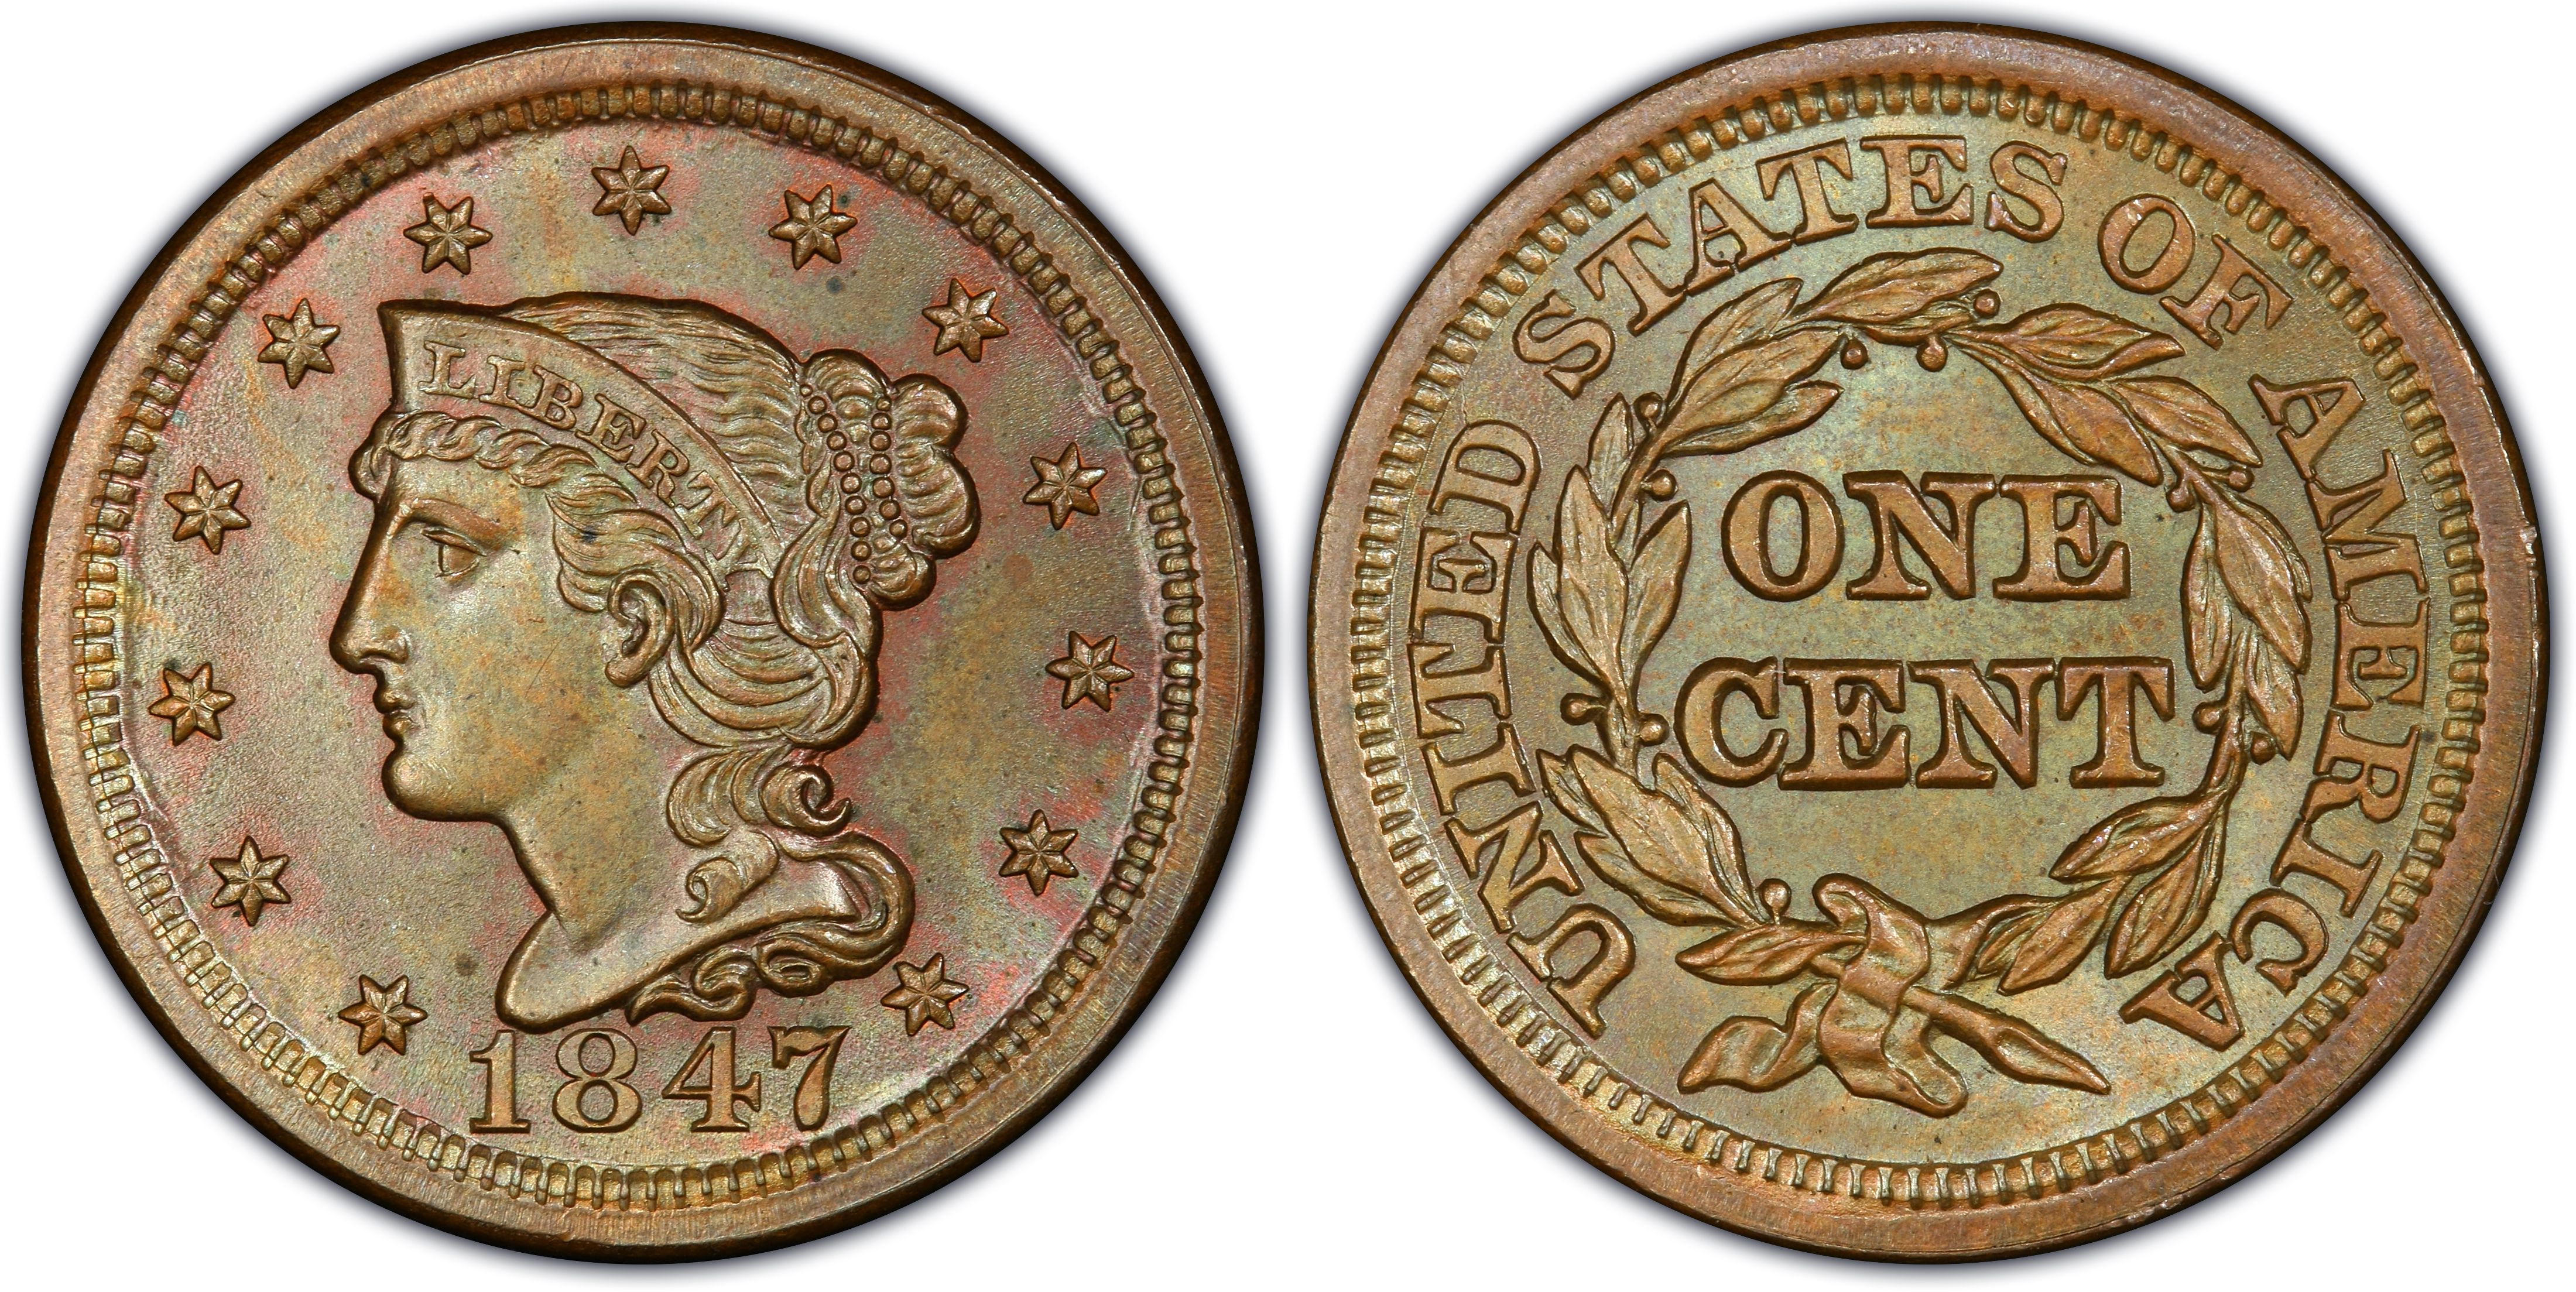 https://images.pcgs.com/CoinFacts/34606831_1325174_2200.jpg